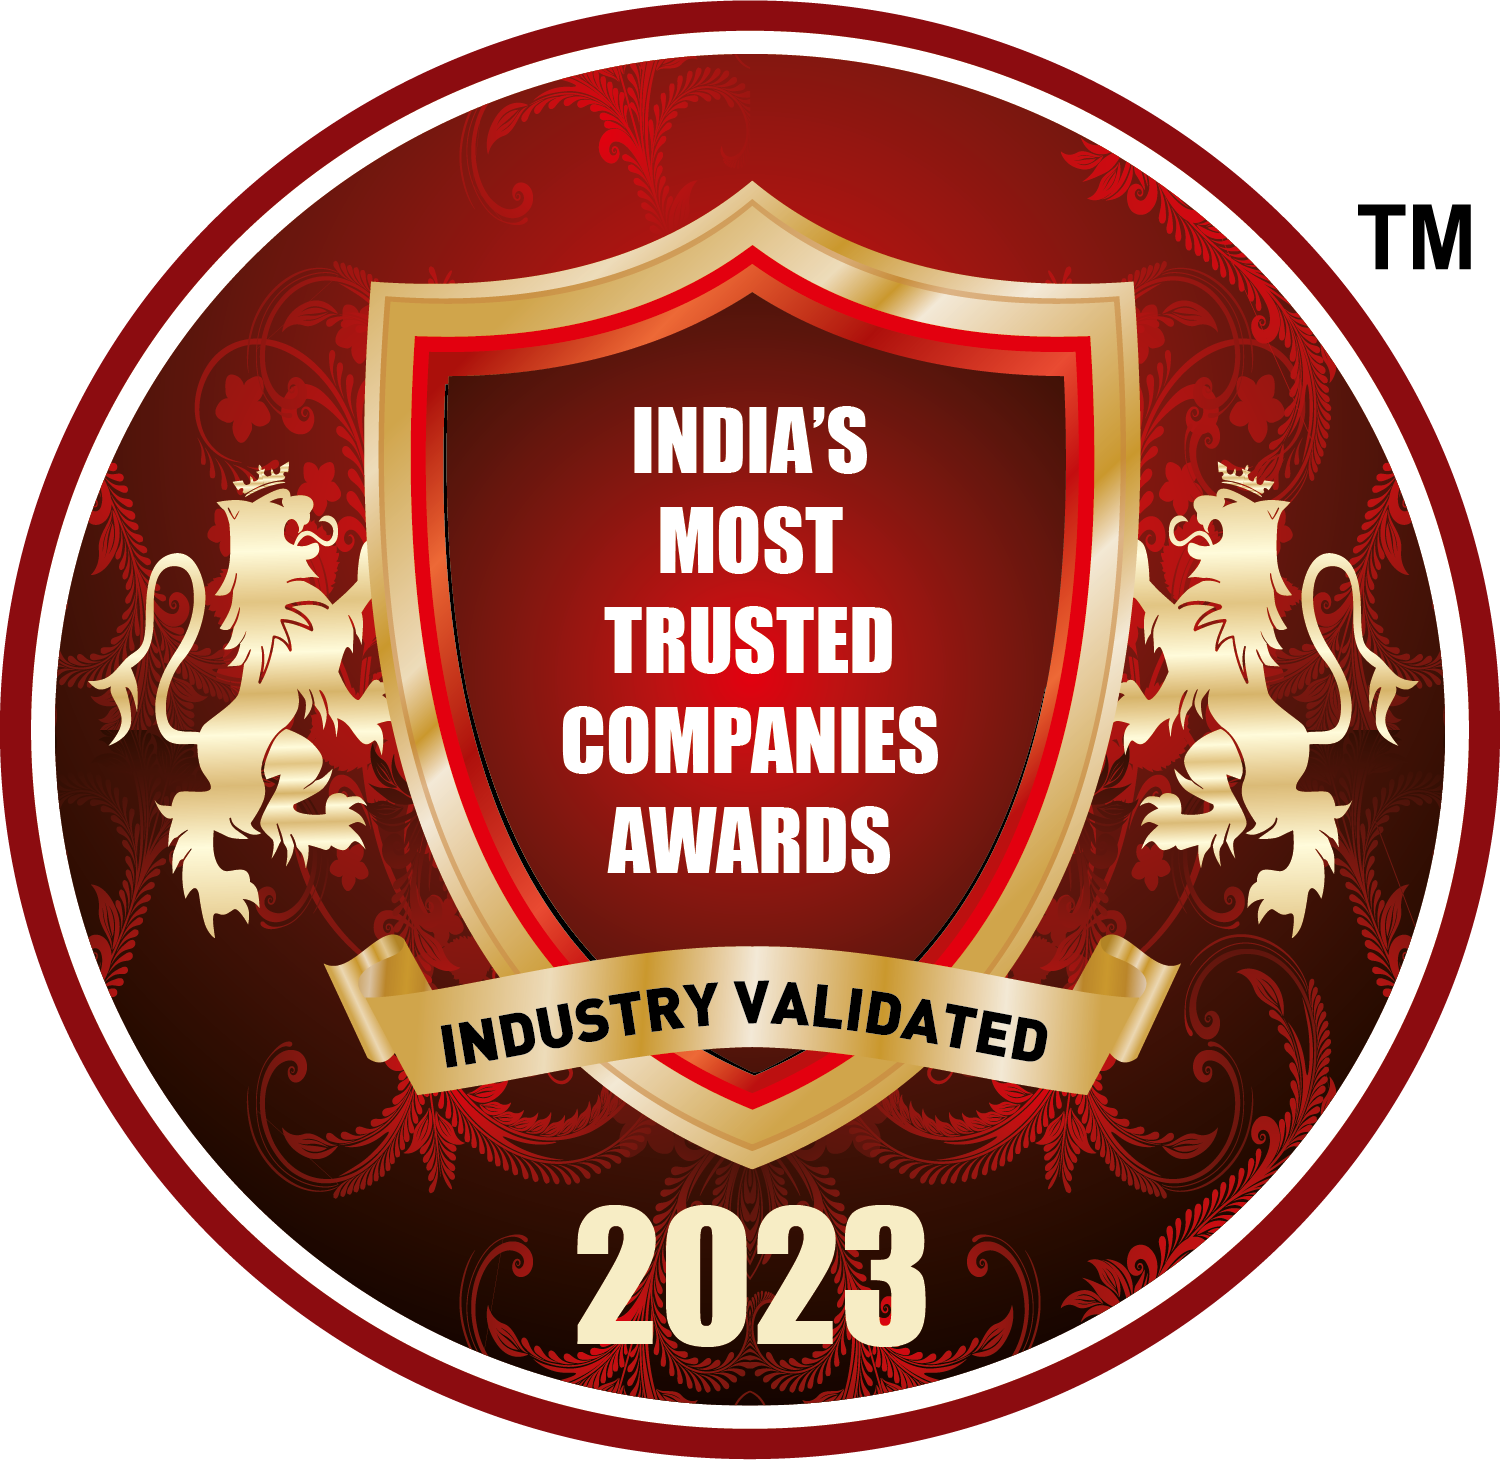 Indias Most Trusted Companies Awards